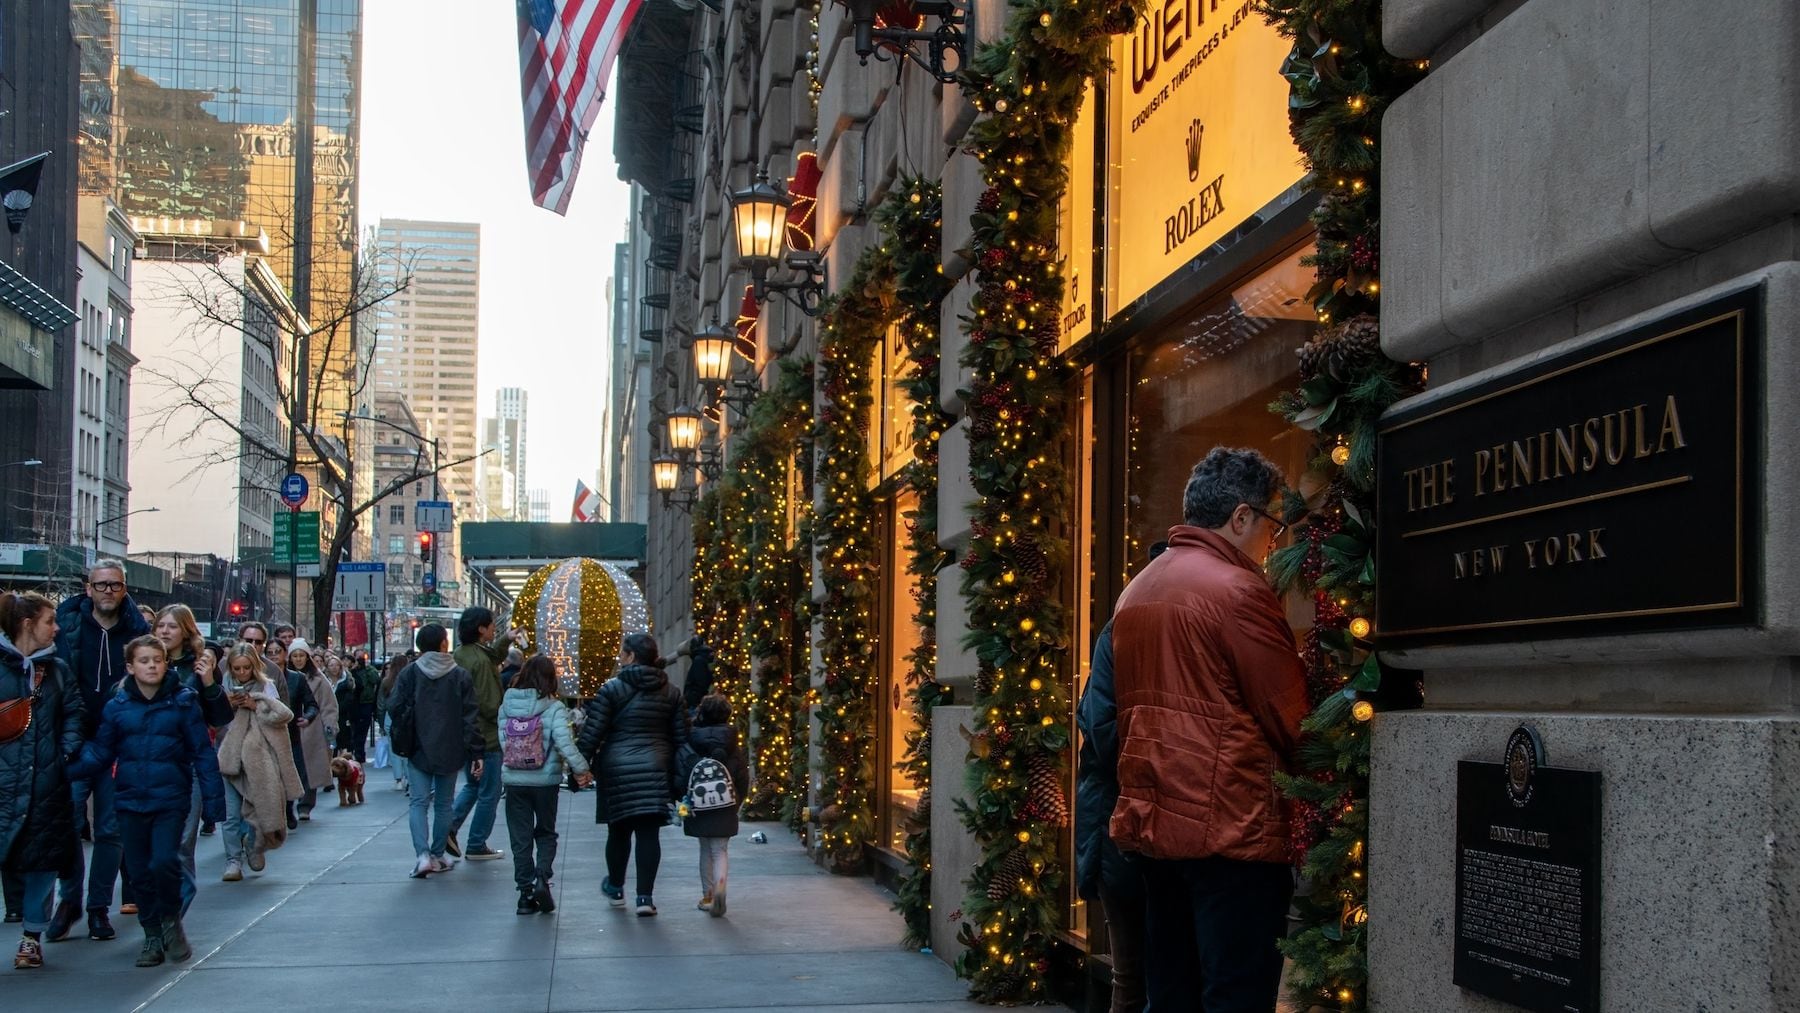 More Than Half of Consumers Say They’ll Trim Holiday Spending